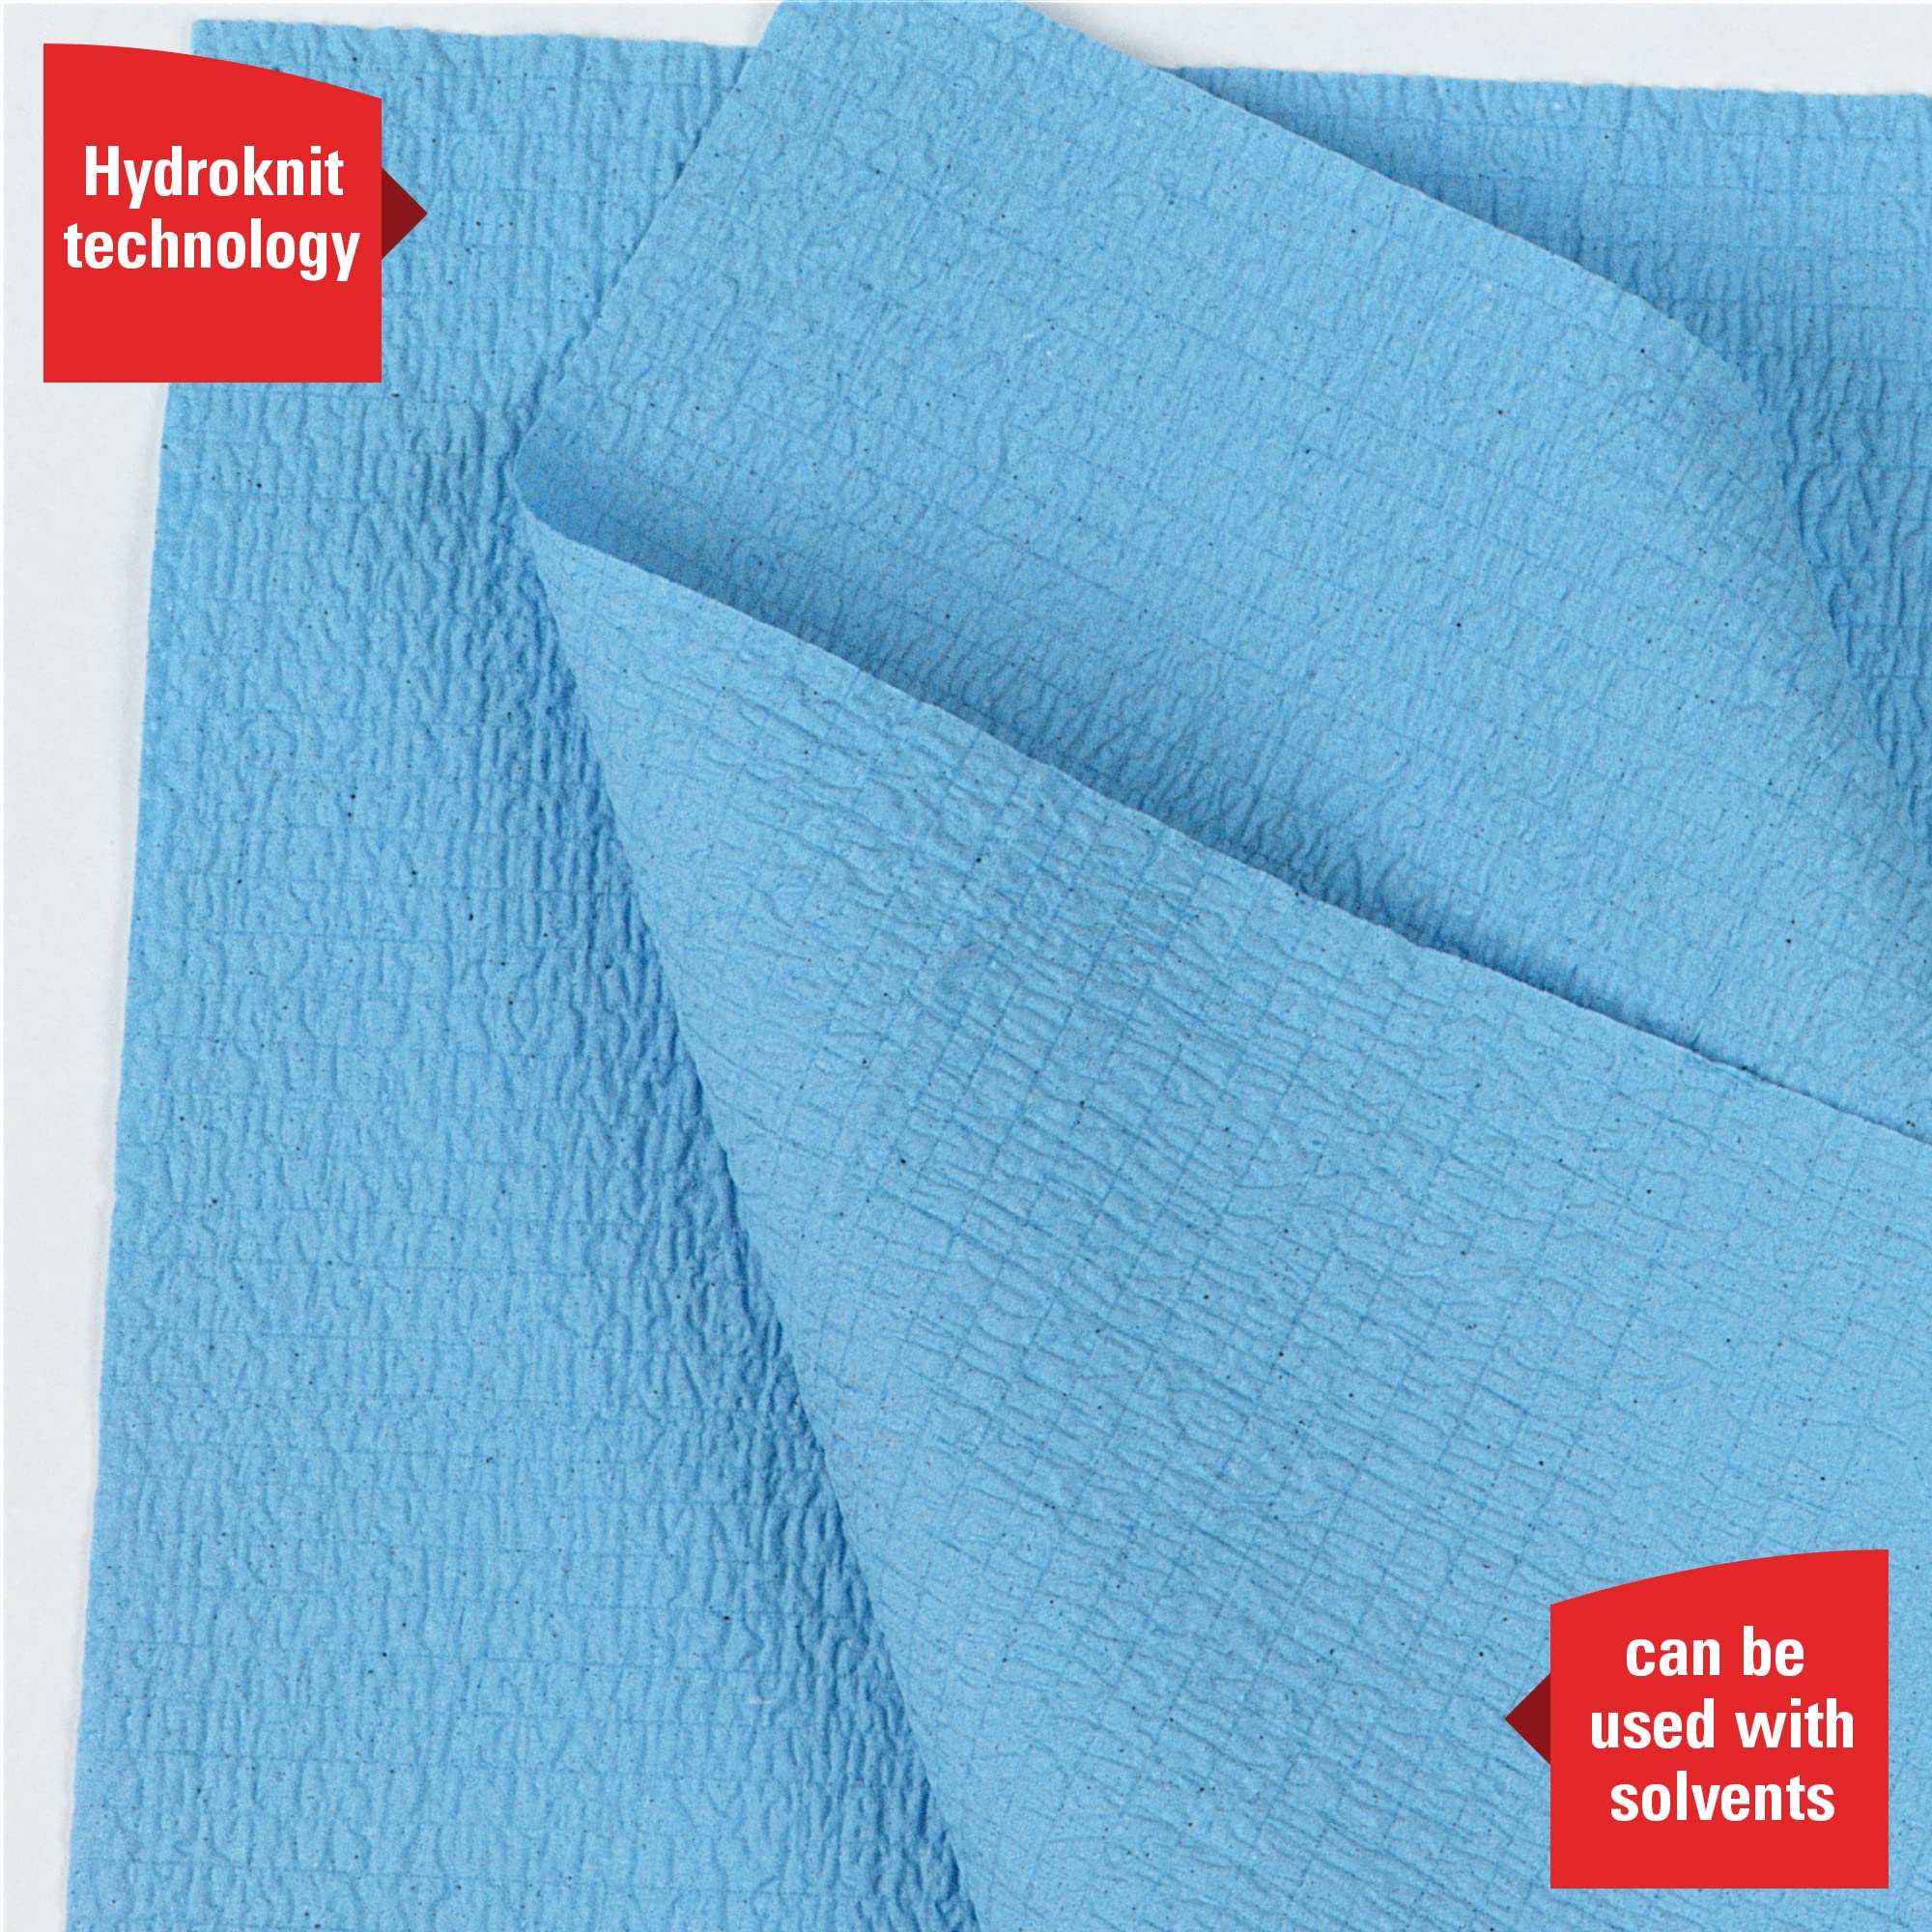 WypAll General Clean X60 Multi-Task Cleaning Cloths (35411), Small Roll, Blue, 130 Sheets / Roll, 12 Rolls / Case, 1,560 Wipes / Case